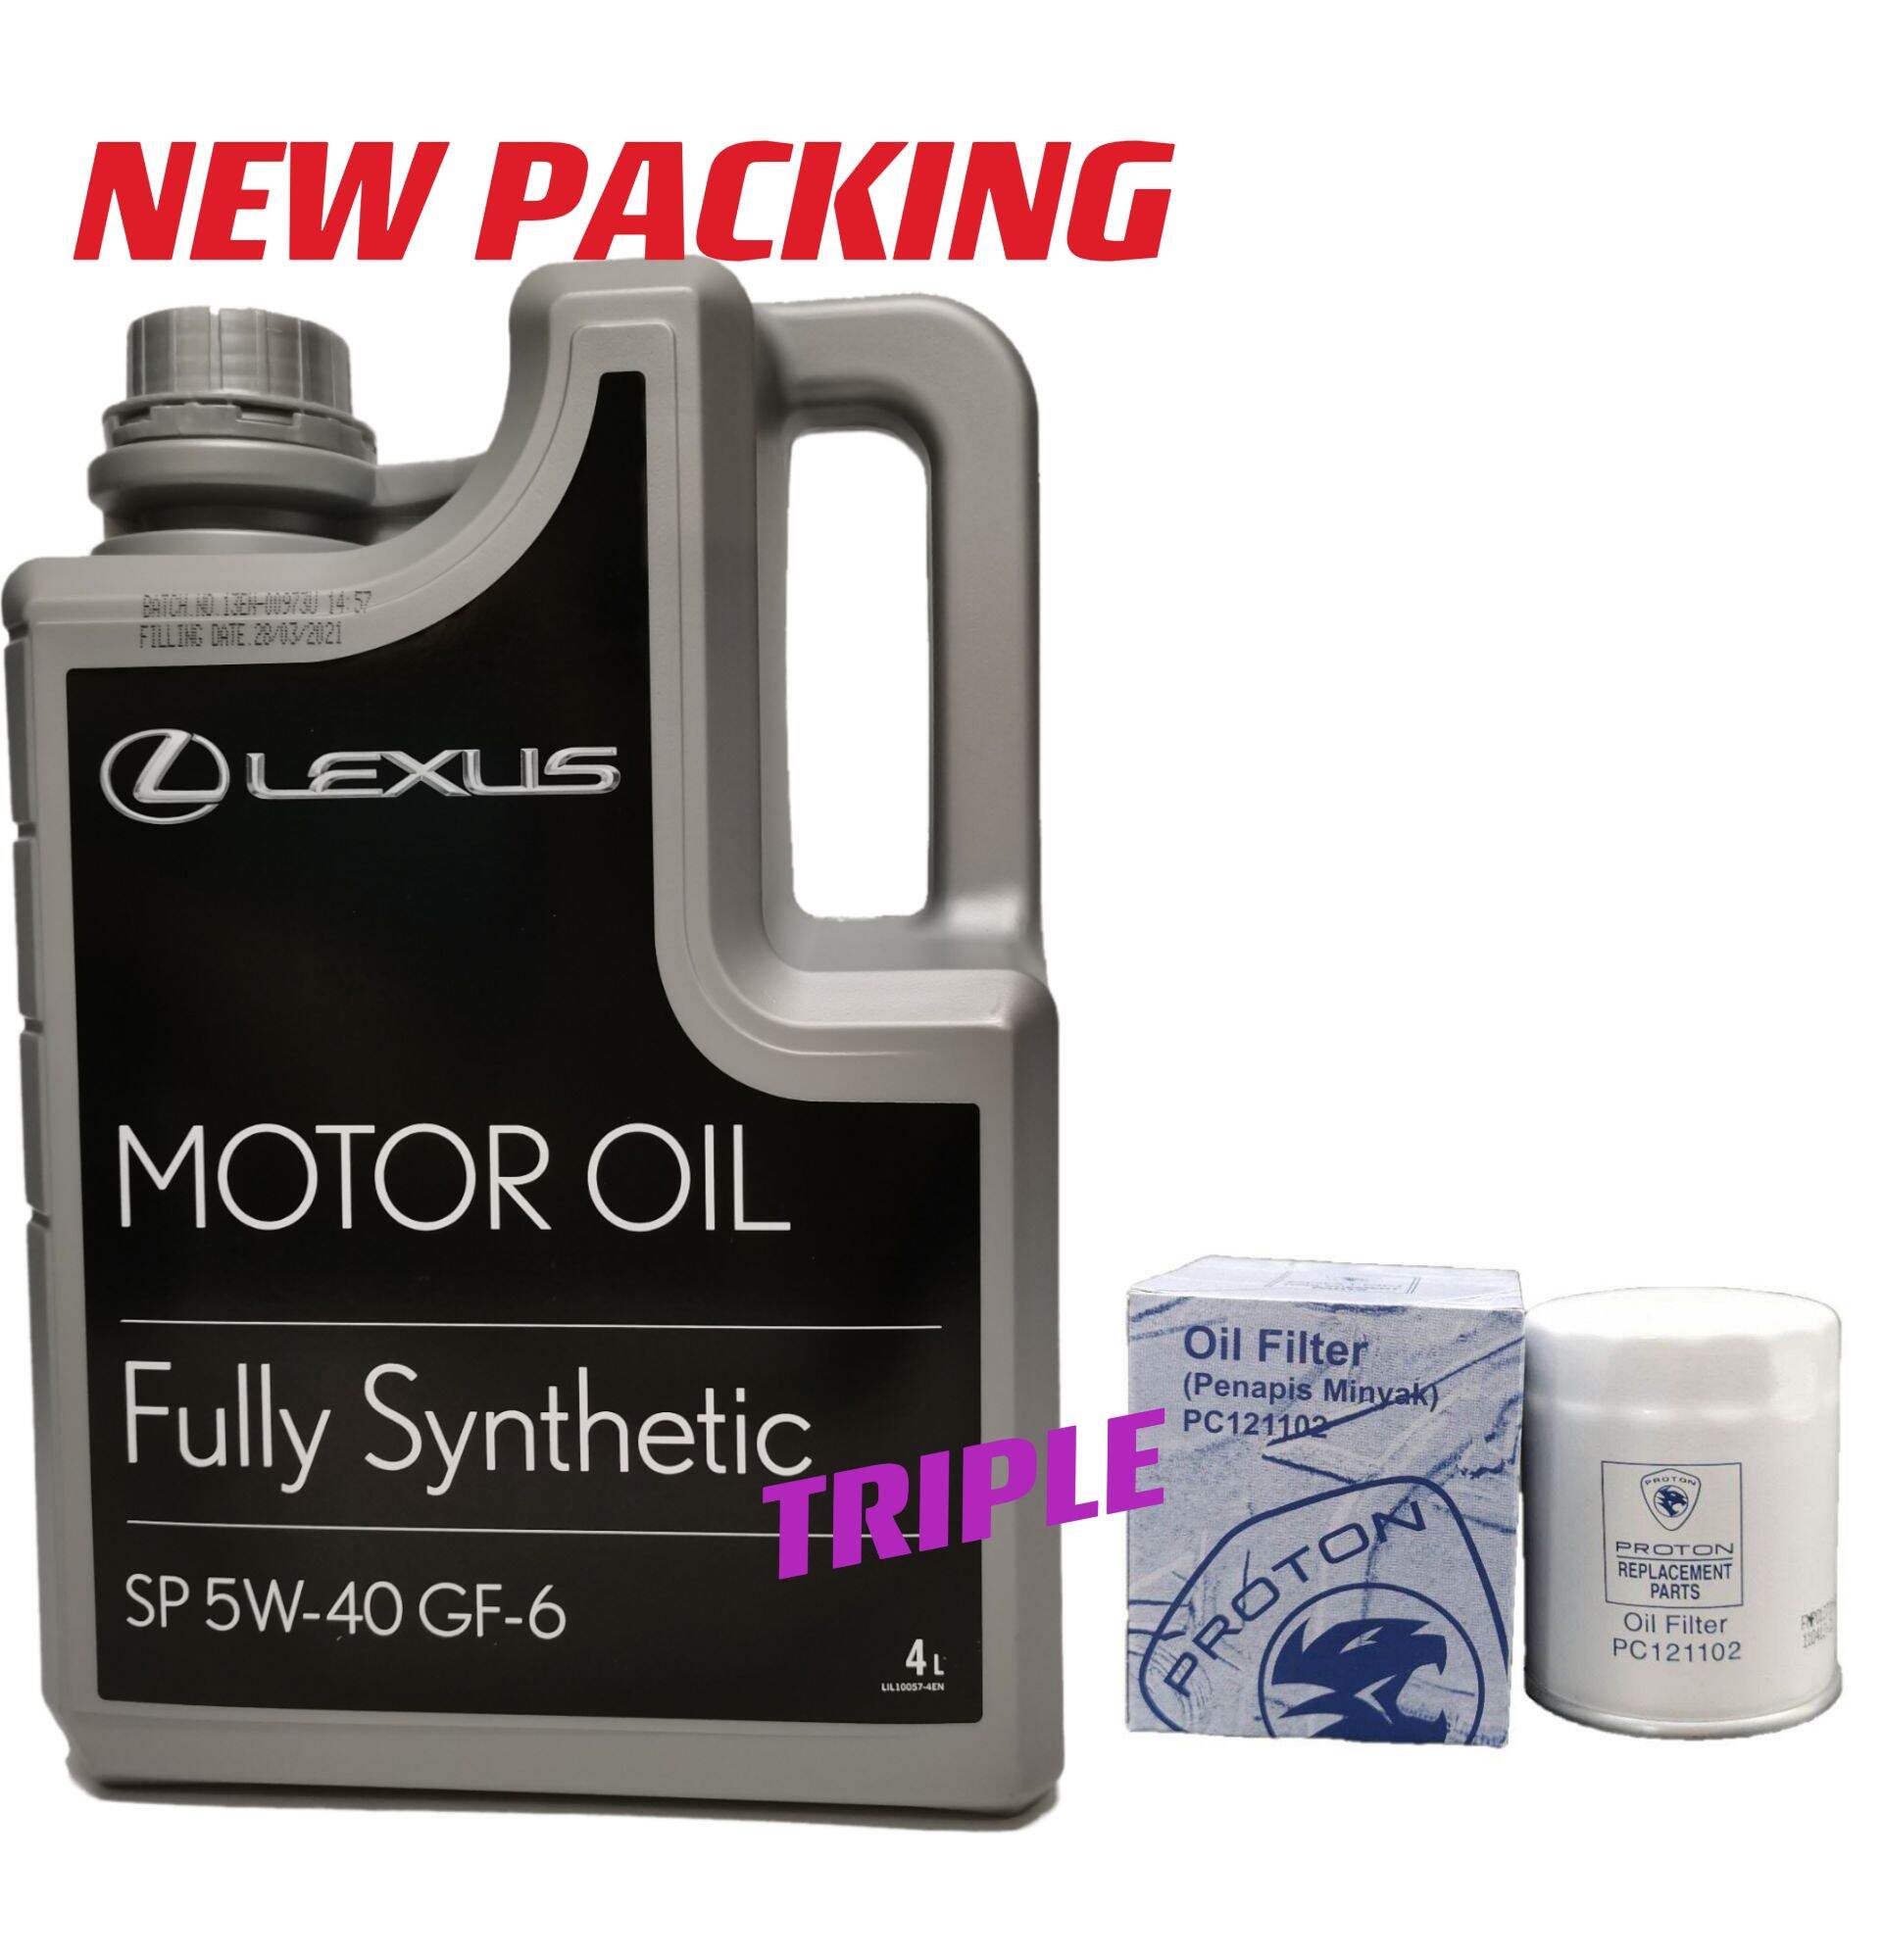 LEXUS FULLY SYNTHETIC 5W40 ENGINE OIL WITH PROTON OIL FILTER